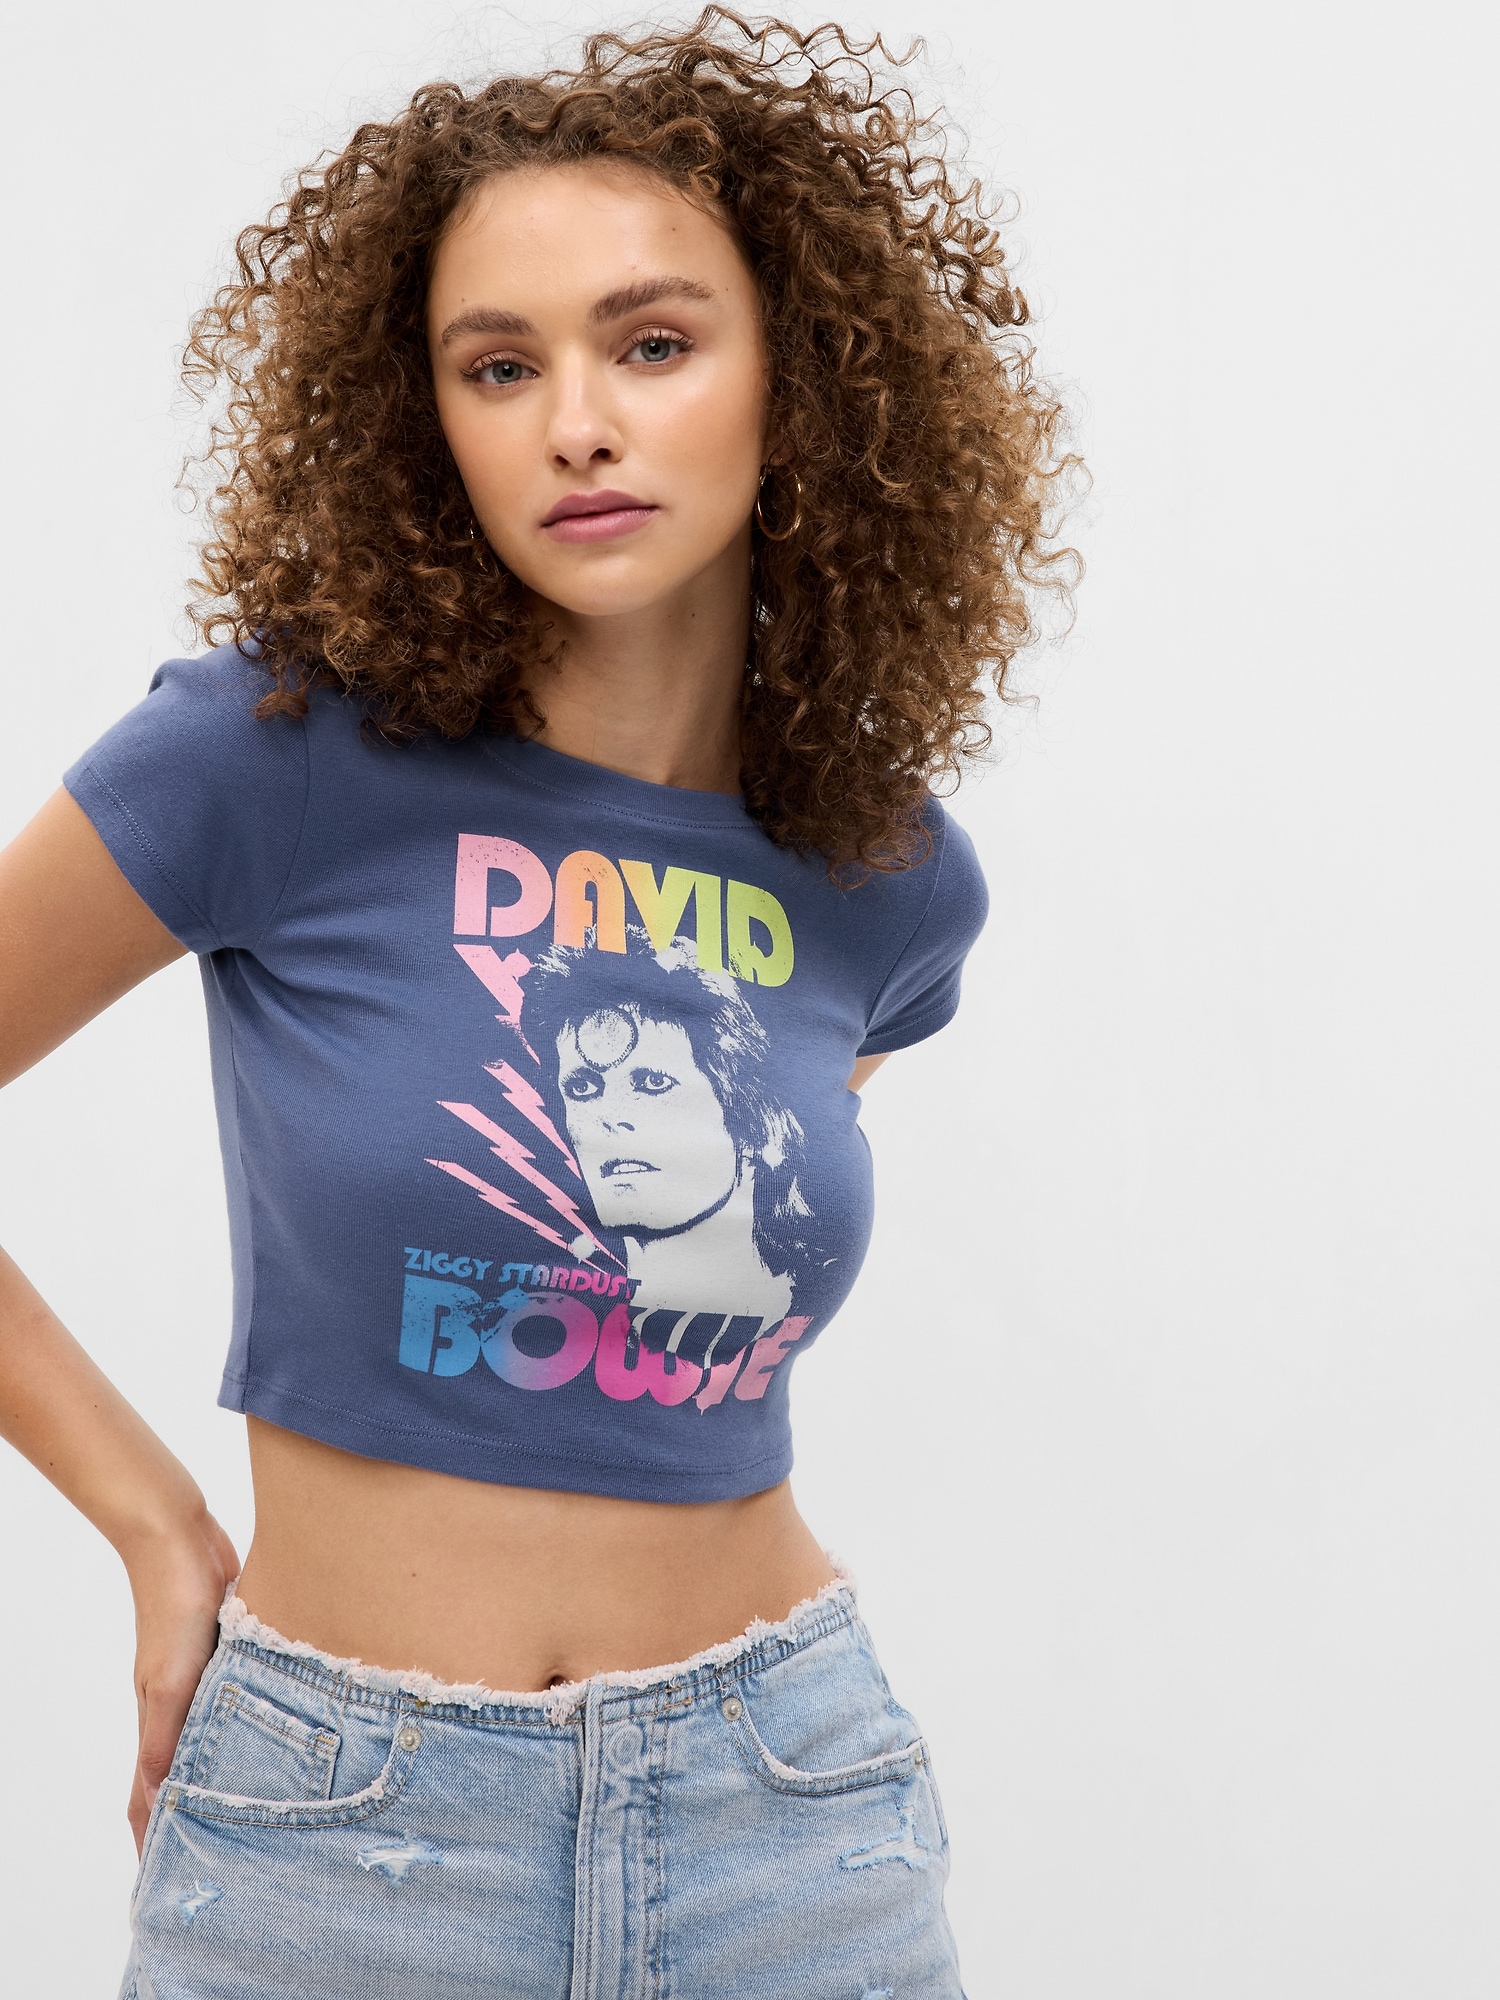 PROJECT GAP Cropped Graphic T-Shirt | Gap